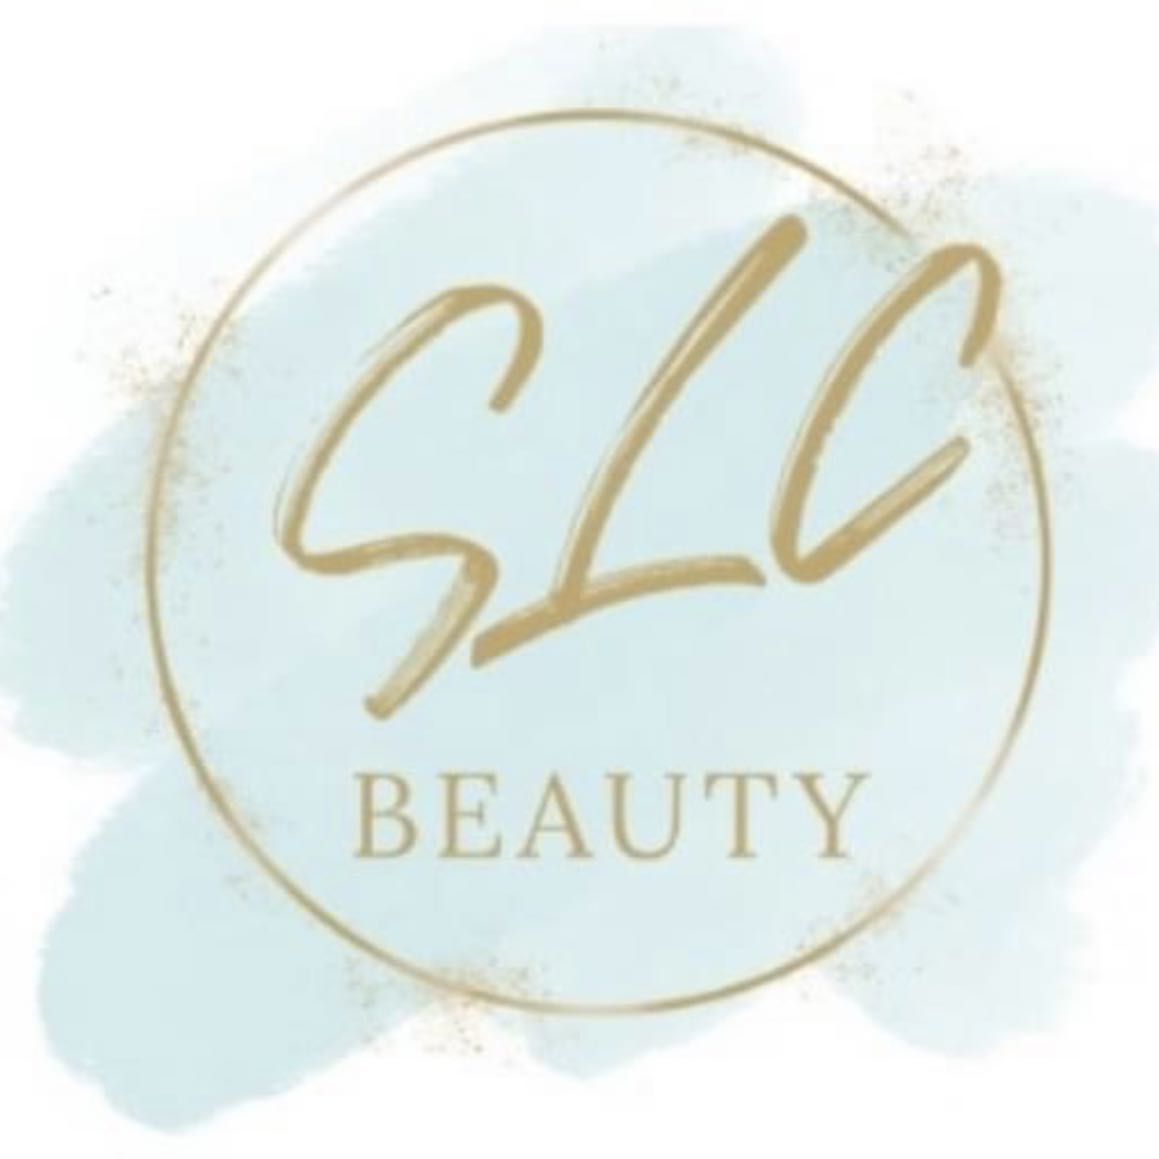 SLC Beauty (located In Beautified By The Ateam), 145a Ormeau Road, Beautified by the Ateam, Belfast